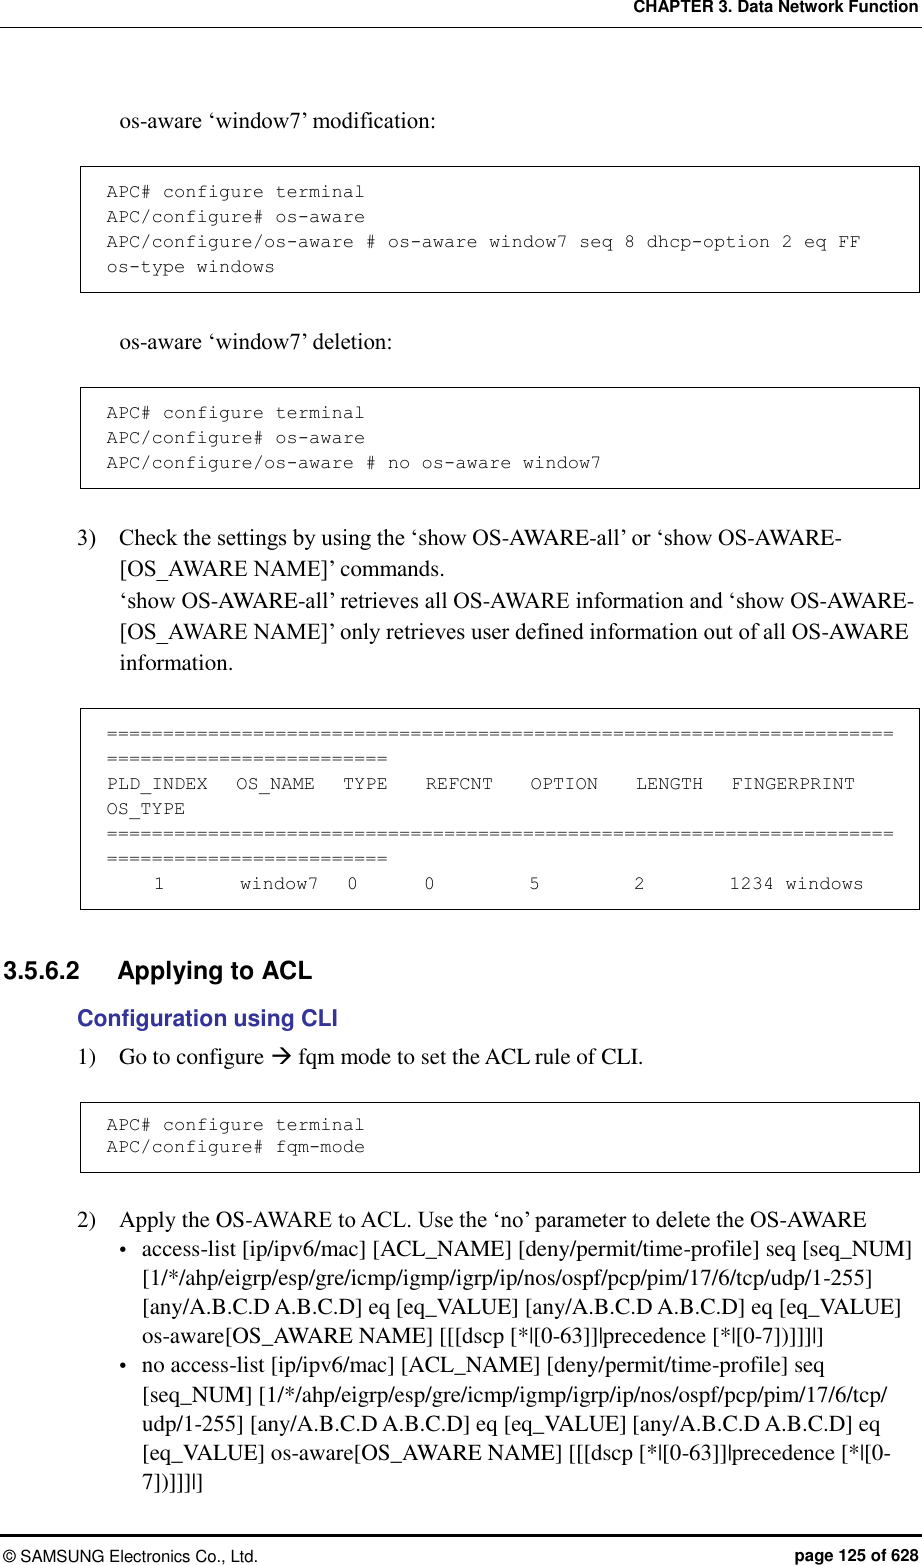 CHAPTER 3. Data Network Function ©  SAMSUNG Electronics Co., Ltd.  page 125 of 628 os-aware ‘window7’ modification:  APC# configure terminal APC/configure# os-aware APC/configure/os-aware # os-aware window7 seq 8 dhcp-option 2 eq FF os-type windows  os-aware ‘window7’ deletion:  APC# configure terminal APC/configure# os-aware APC/configure/os-aware # no os-aware window7   3)    Check the settings by using the ‘show OS-AWARE-all’ or ‘show OS-AWARE-[OS_AWARE NAME]’ commands. ‘show OS-AWARE-all’ retrieves all OS-AWARE information and ‘show OS-AWARE-[OS_AWARE NAME]’ only retrieves user defined information out of all OS-AWARE information.  =============================================================================================== PLD_INDEX   OS_NAME   TYPE    REFCNT    OPTION    LENGTH   FINGERPRINT OS_TYPE ===============================================================================================      1        window7   0       0          5          2         1234 windows  3.5.6.2  Applying to ACL Configuration using CLI 1)    Go to configure  fqm mode to set the ACL rule of CLI.  APC# configure terminal APC/configure# fqm-mode  2)    Apply the OS-AWARE to ACL. Use the ‘no’ parameter to delete the OS-AWARE  access-list [ip/ipv6/mac] [ACL_NAME] [deny/permit/time-profile] seq [seq_NUM] [1/*/ahp/eigrp/esp/gre/icmp/igmp/igrp/ip/nos/ospf/pcp/pim/17/6/tcp/udp/1-255] [any/A.B.C.D A.B.C.D] eq [eq_VALUE] [any/A.B.C.D A.B.C.D] eq [eq_VALUE] os-aware[OS_AWARE NAME] [[[dscp [*|[0-63]]|precedence [*|[0-7])]]]|]  no access-list [ip/ipv6/mac] [ACL_NAME] [deny/permit/time-profile] seq [seq_NUM] [1/*/ahp/eigrp/esp/gre/icmp/igmp/igrp/ip/nos/ospf/pcp/pim/17/6/tcp/ udp/1-255] [any/A.B.C.D A.B.C.D] eq [eq_VALUE] [any/A.B.C.D A.B.C.D] eq [eq_VALUE] os-aware[OS_AWARE NAME] [[[dscp [*|[0-63]]|precedence [*|[0-7])]]]|] 